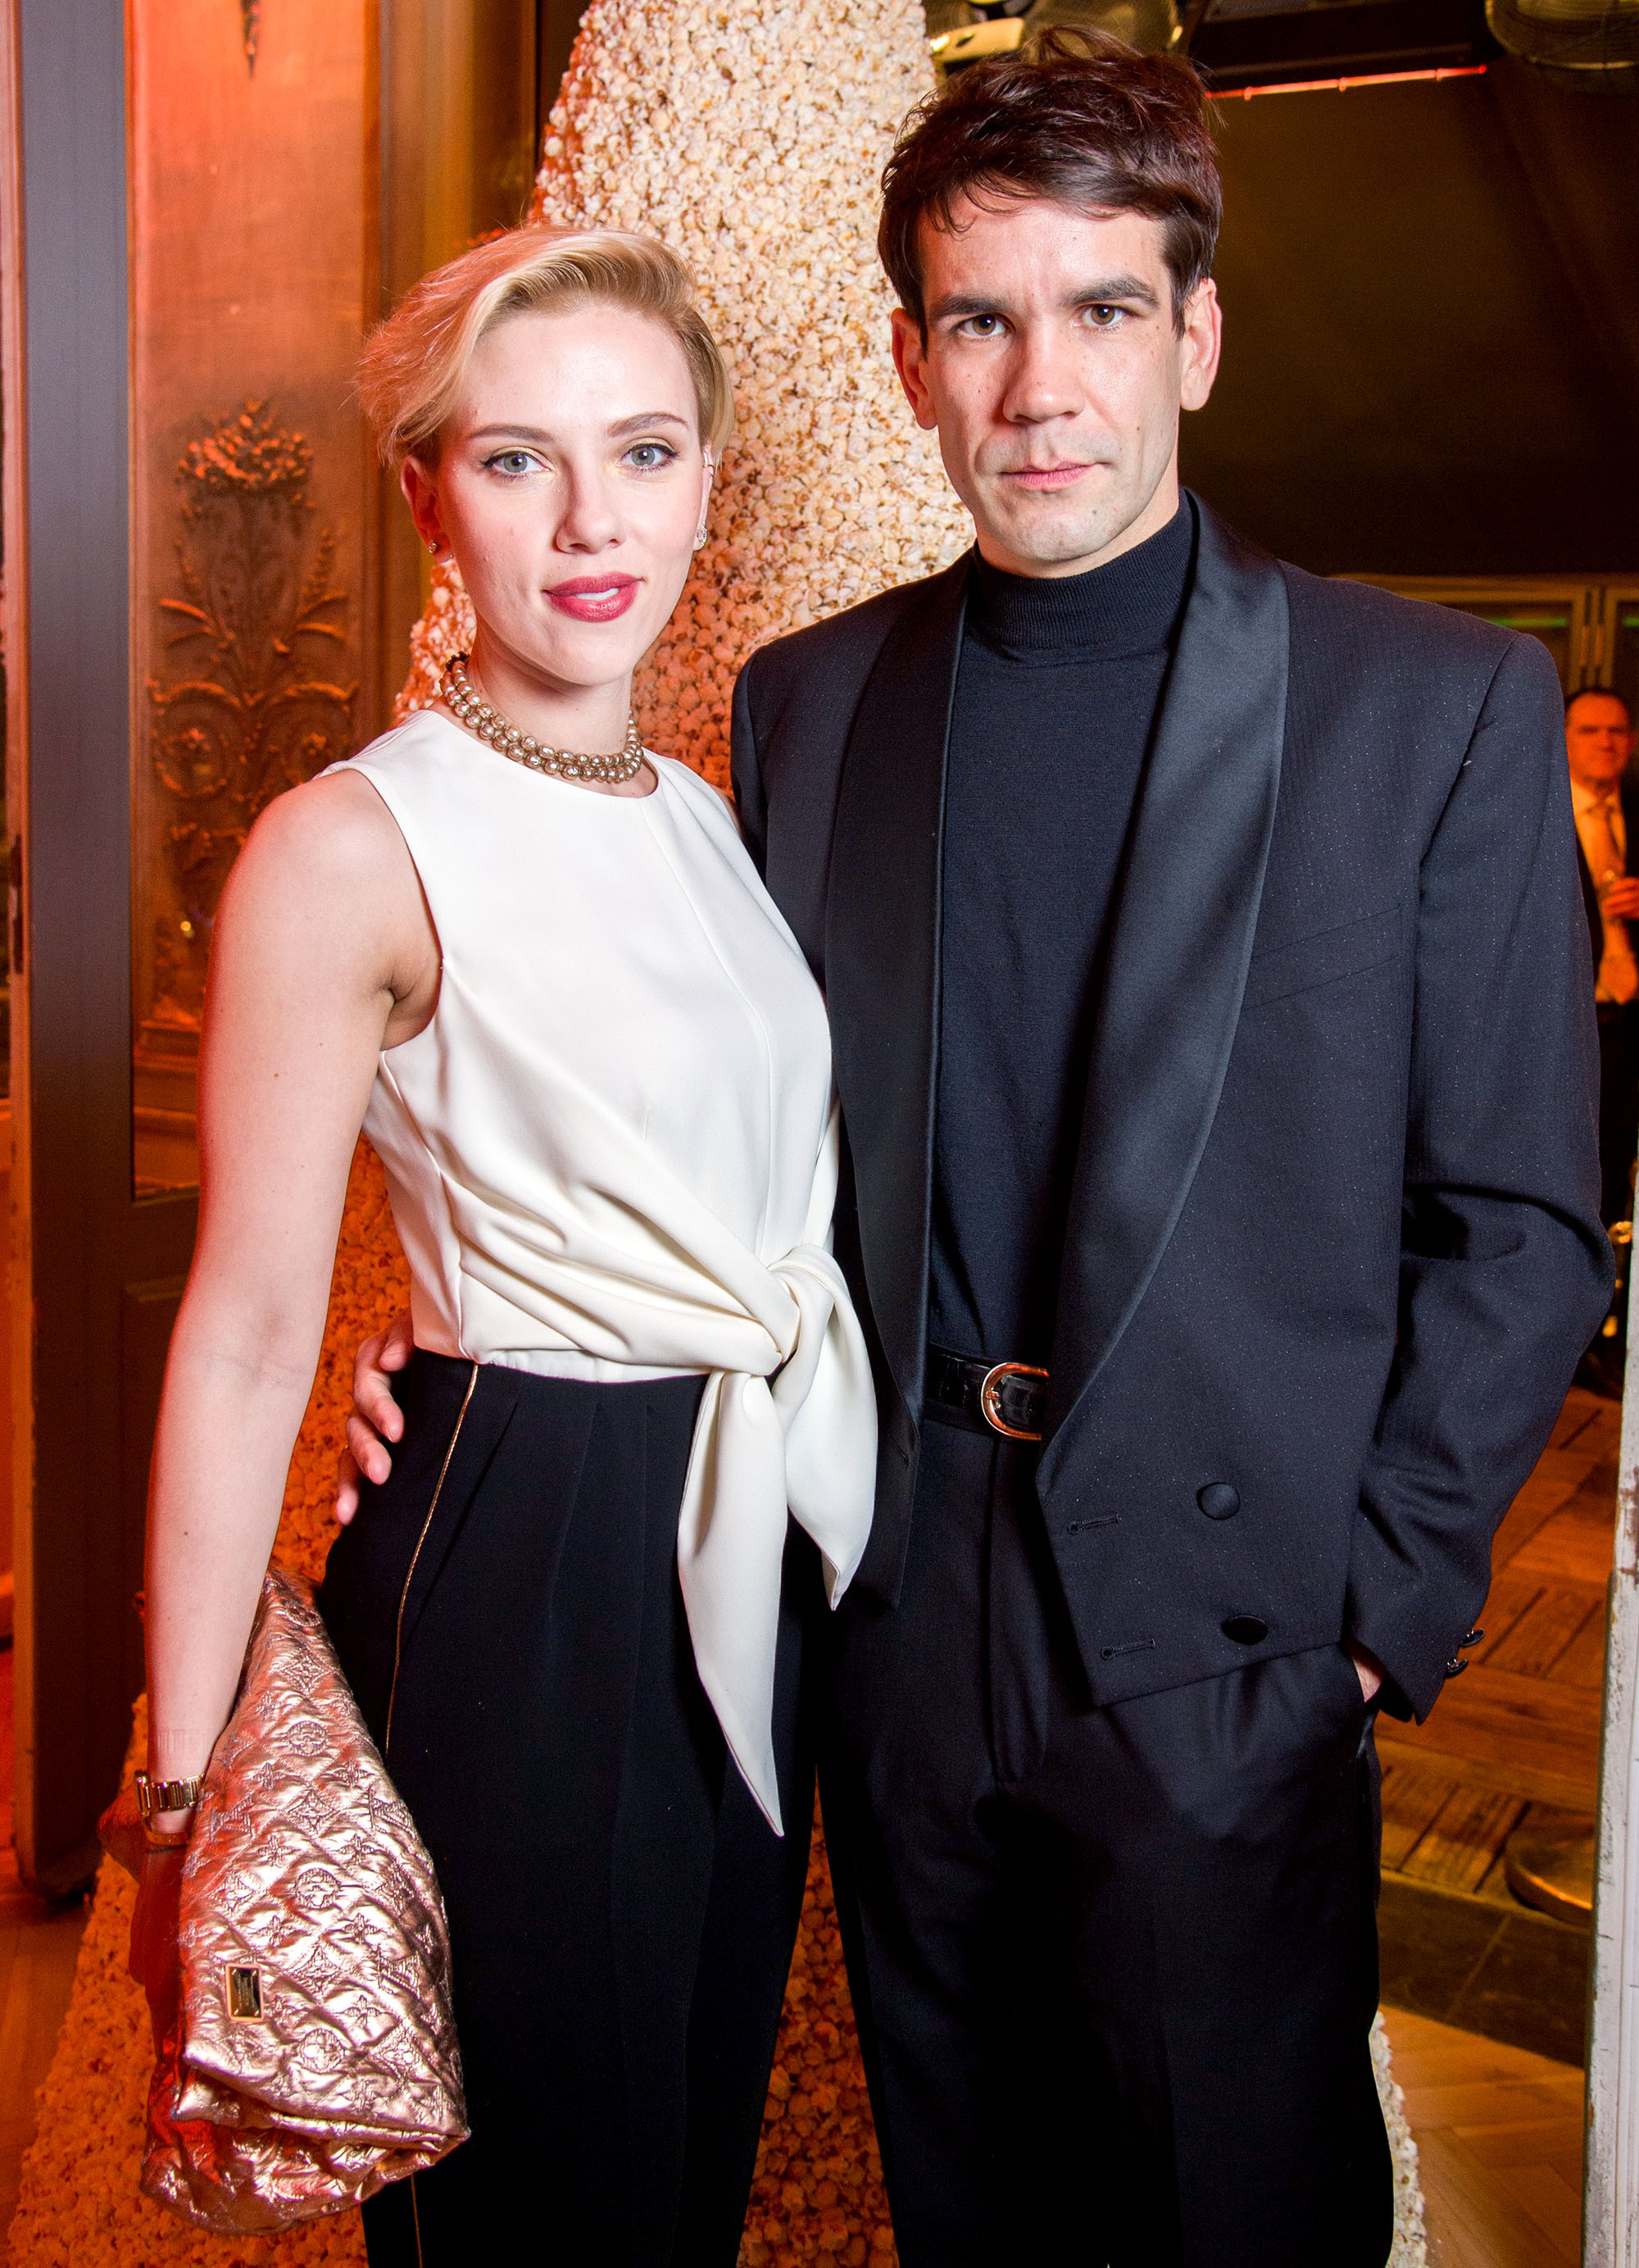 PARIS, FRANCE - DECEMBER 16:  Scarlett Johansson and Romain Dauriac attend the Yummy Pop Grand Opening Party at Theatre du Gymnase on December 16, 2016 in Paris, France.  (Photo by Pascal Le Segretain/Getty Images for Yummy Pop)